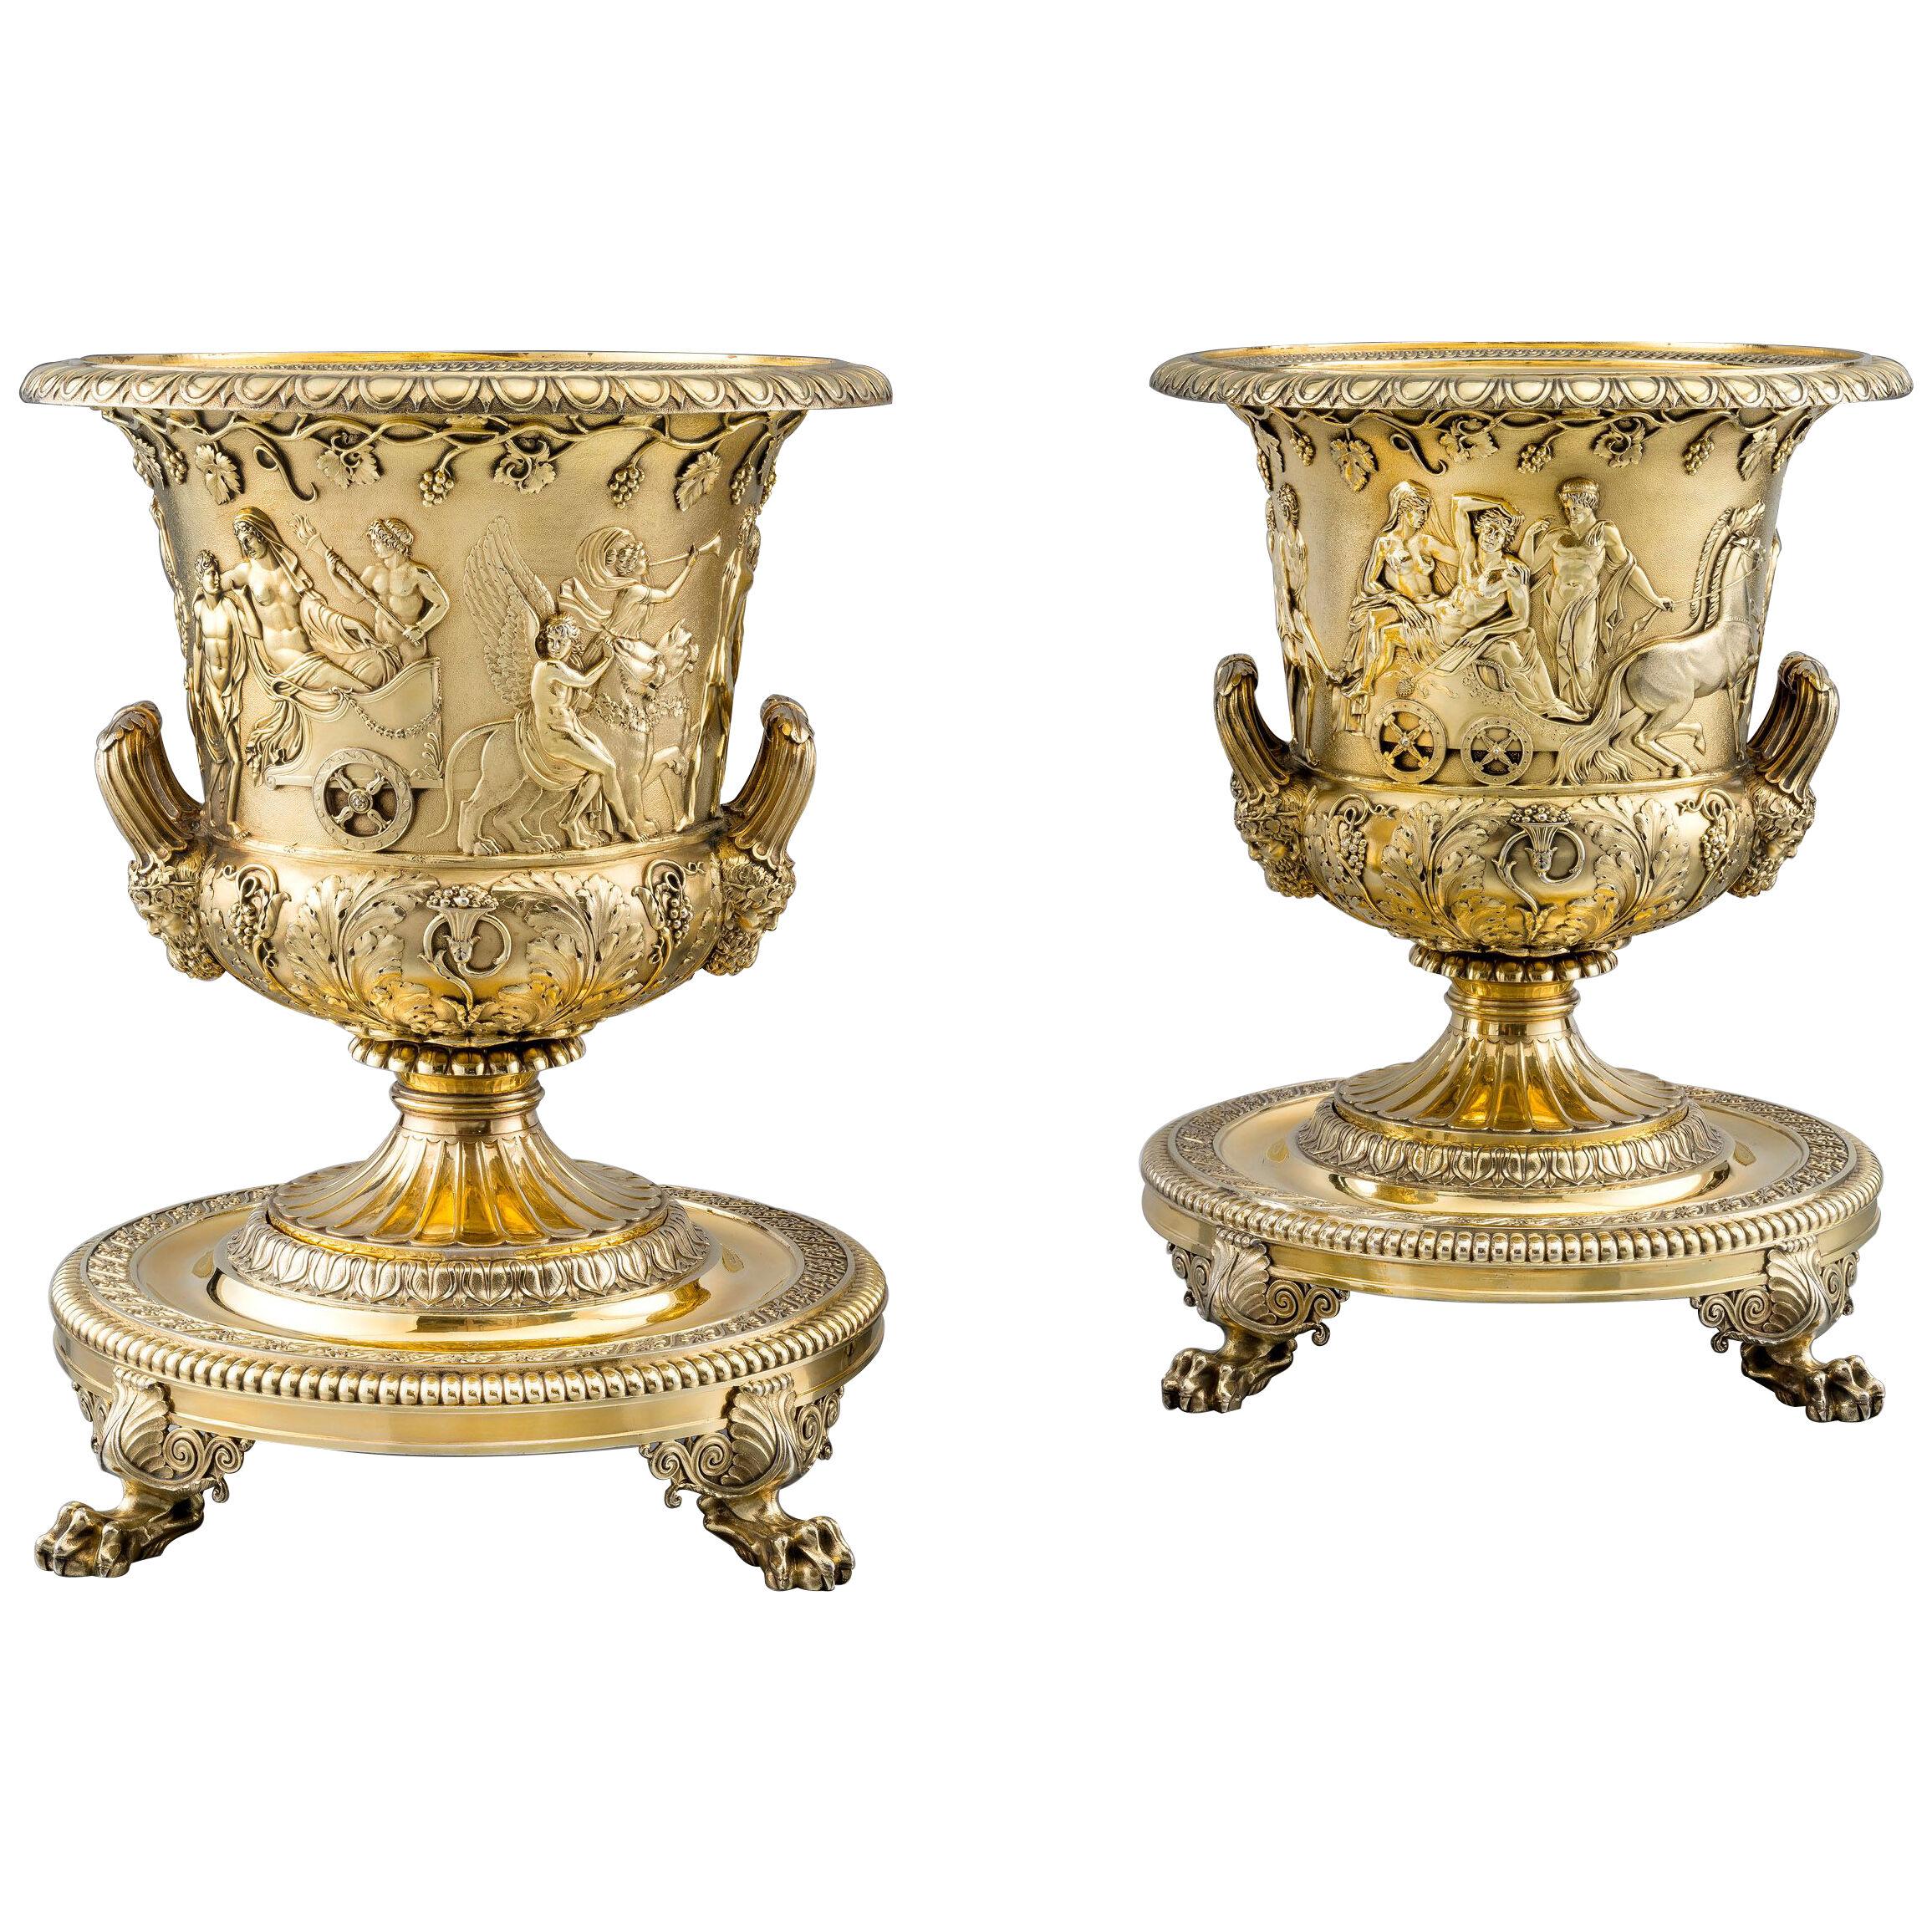 A Highly Important Pair of Silver-Gilt Wine Coolers & Stands